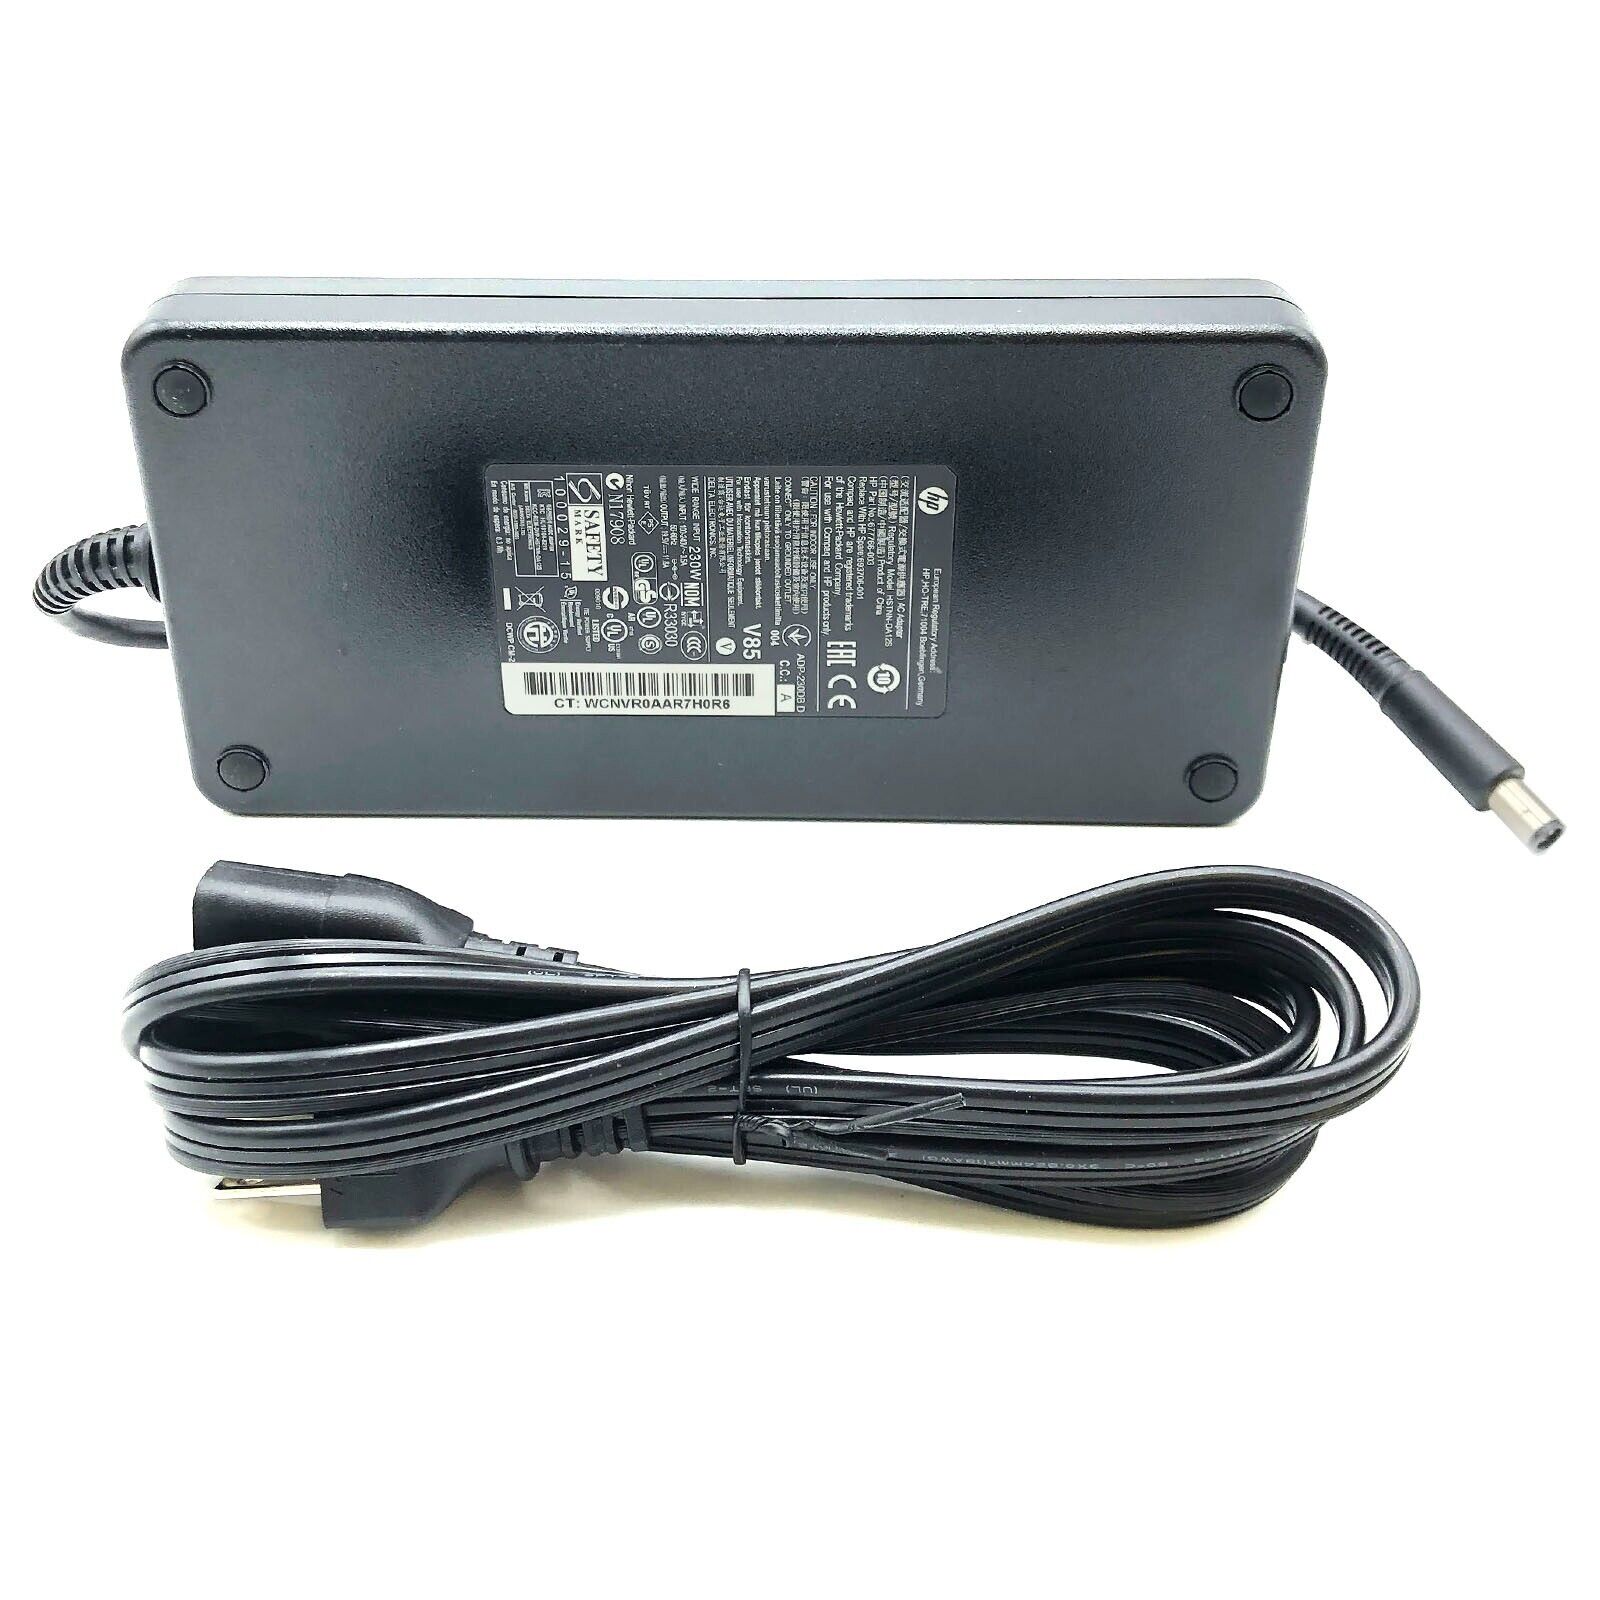 Authentic 230W AC Power Adapter 19.5V for HP ElitePOS G1 Cash Register Kiosk 141 Compatible Brand For HP Brand HP Type